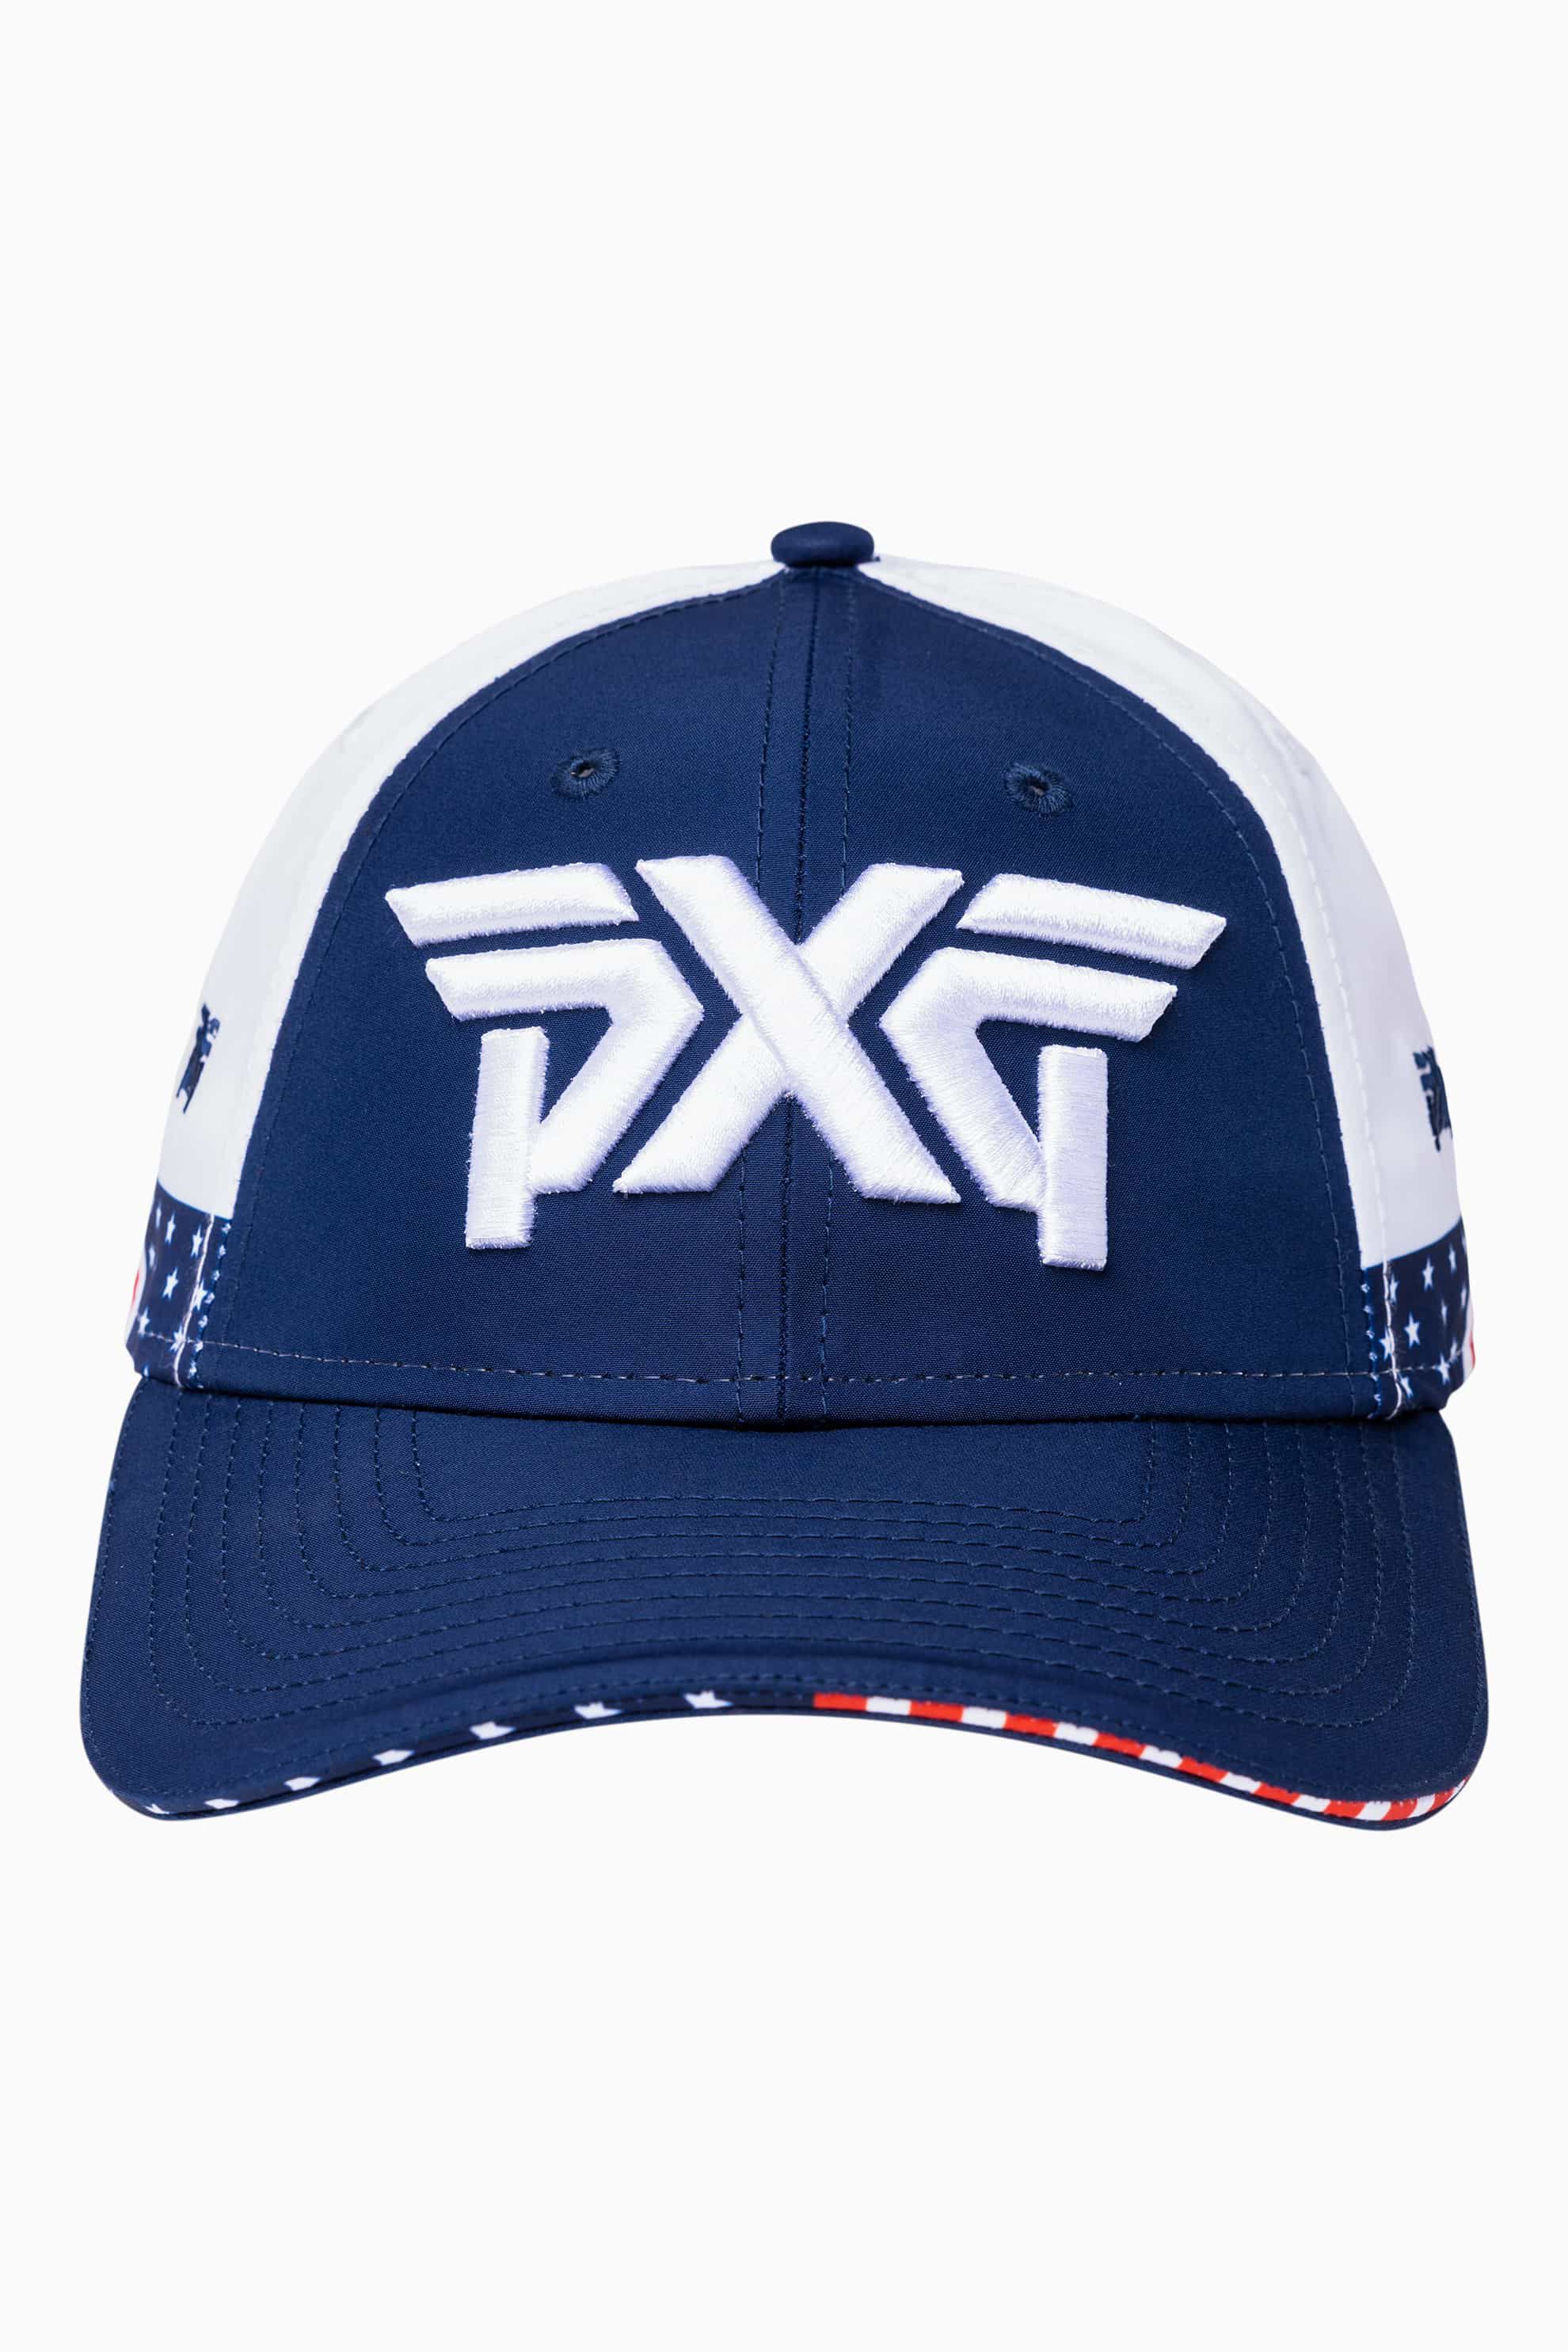 Shop PXG Golf Hats - Caps, Visors, Beanies and More | PXG